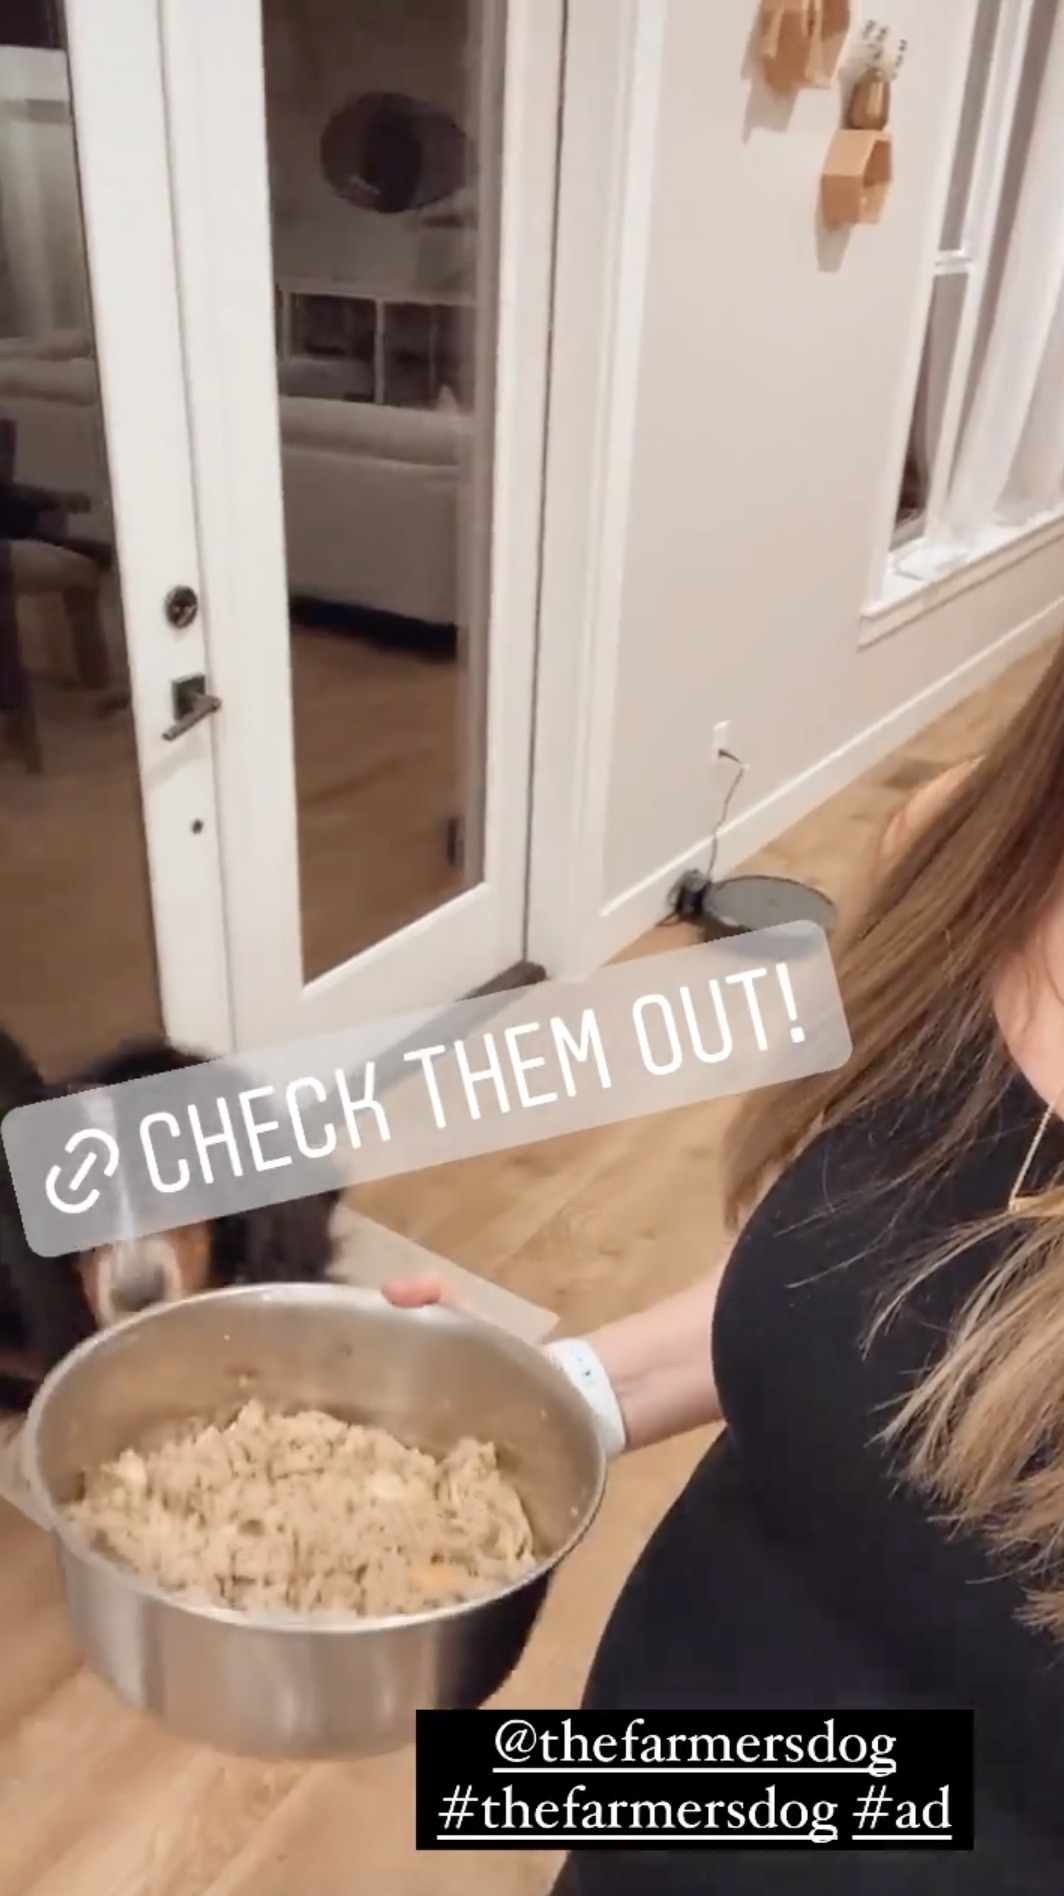 Pregnant Tori Roloff's Baby Bump Album Ahead of 3rd Child's Arrival Dog Day